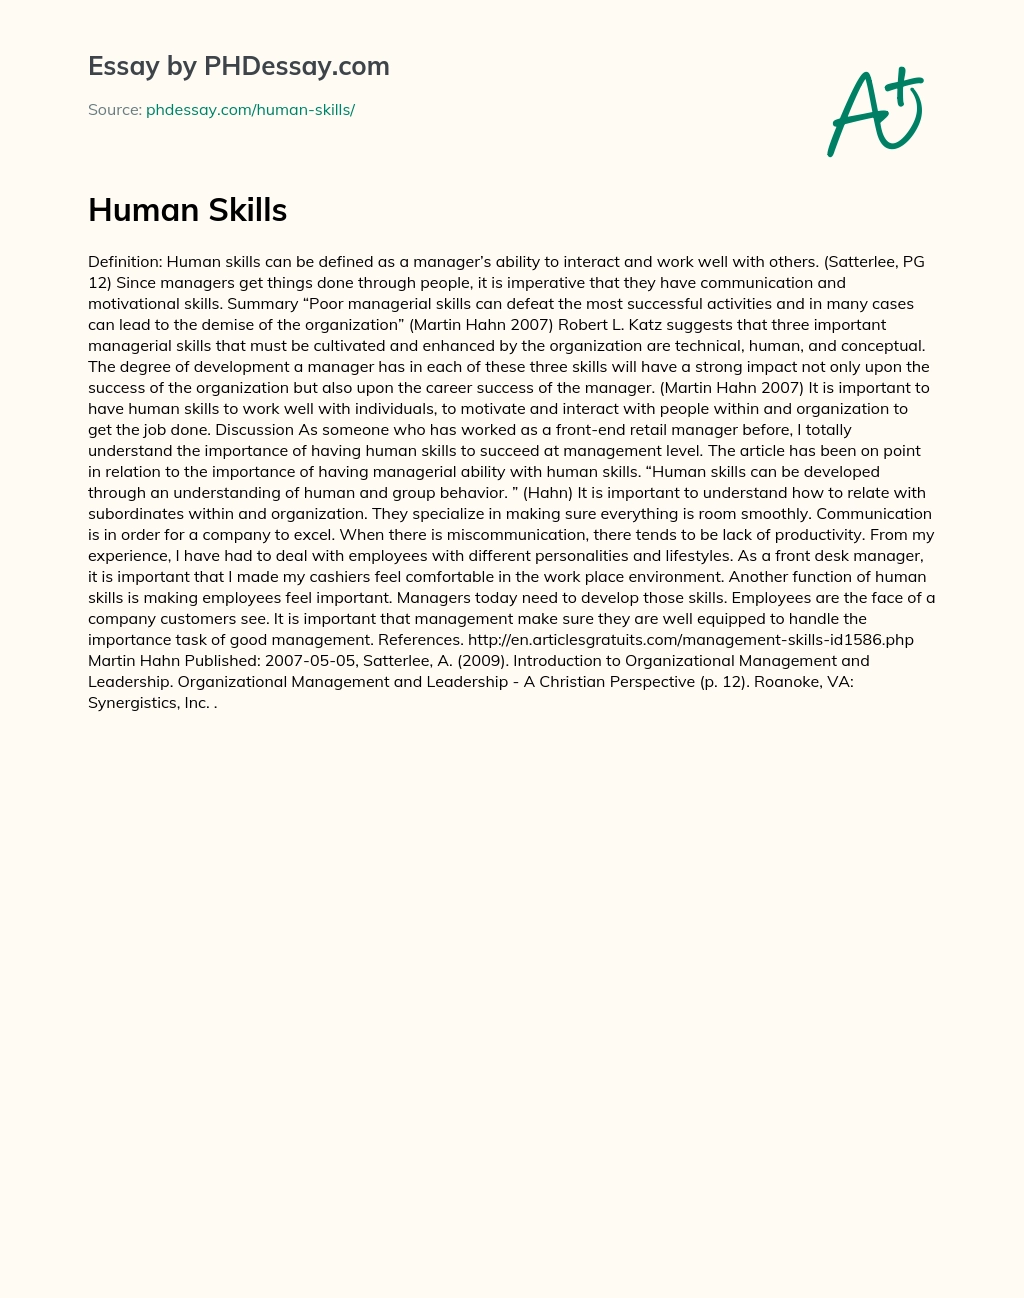 Importance of Human Skills in Managerial Success essay